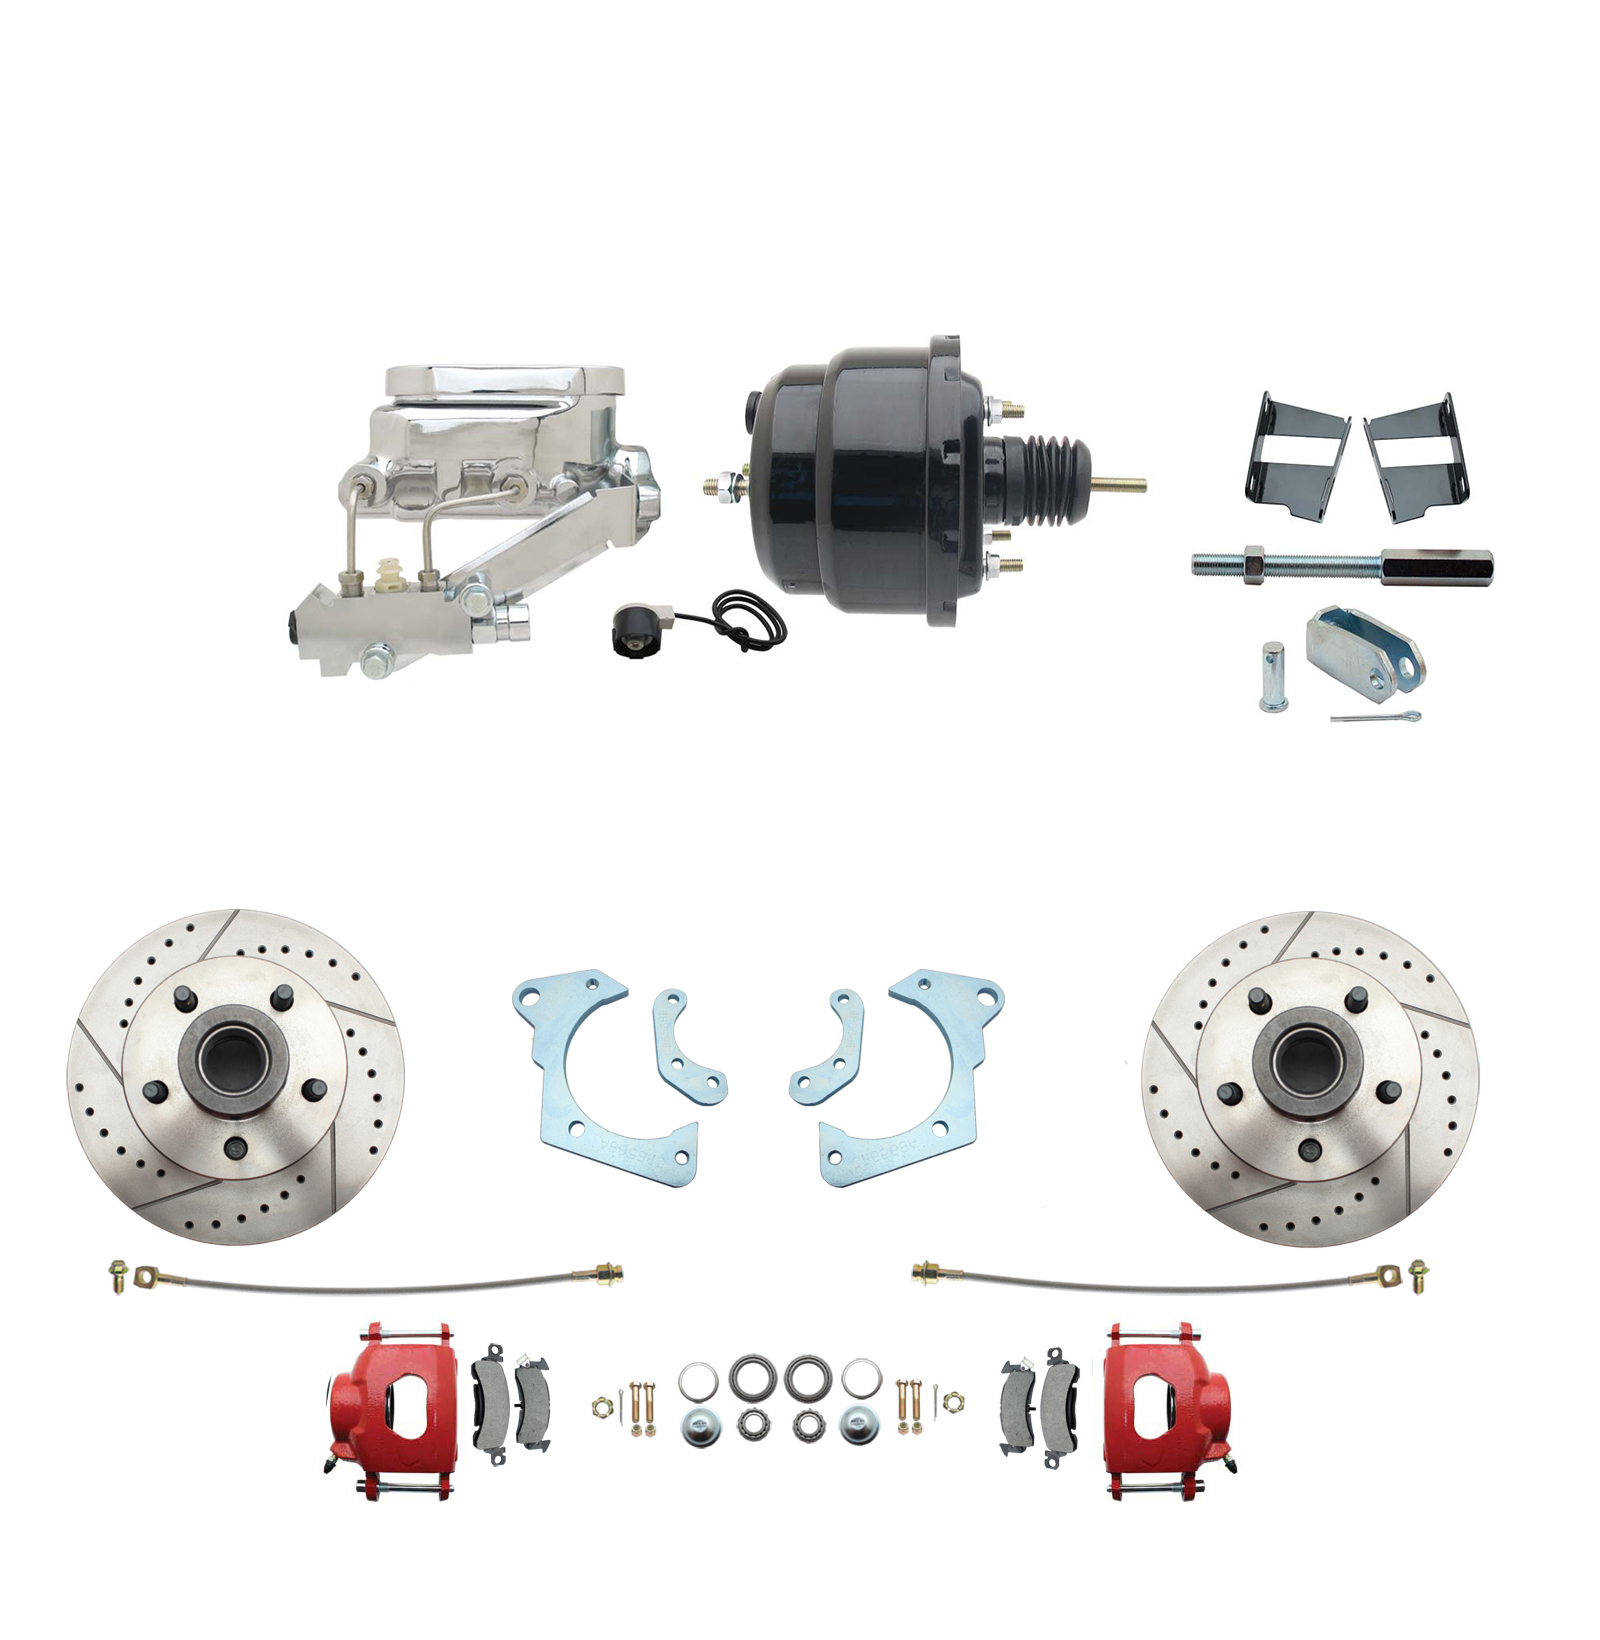 1965-1968 GM Full Size Front Disc Brake Kit Red Powder Coated Calipers Drilled/Slotted Rotors (Impala, Bel Air, Biscayne) & 8 Dual Powder Coated Black Booster Conversion Kit W/ Chrome Flat Top Master Cylinder Left Mount Disc/